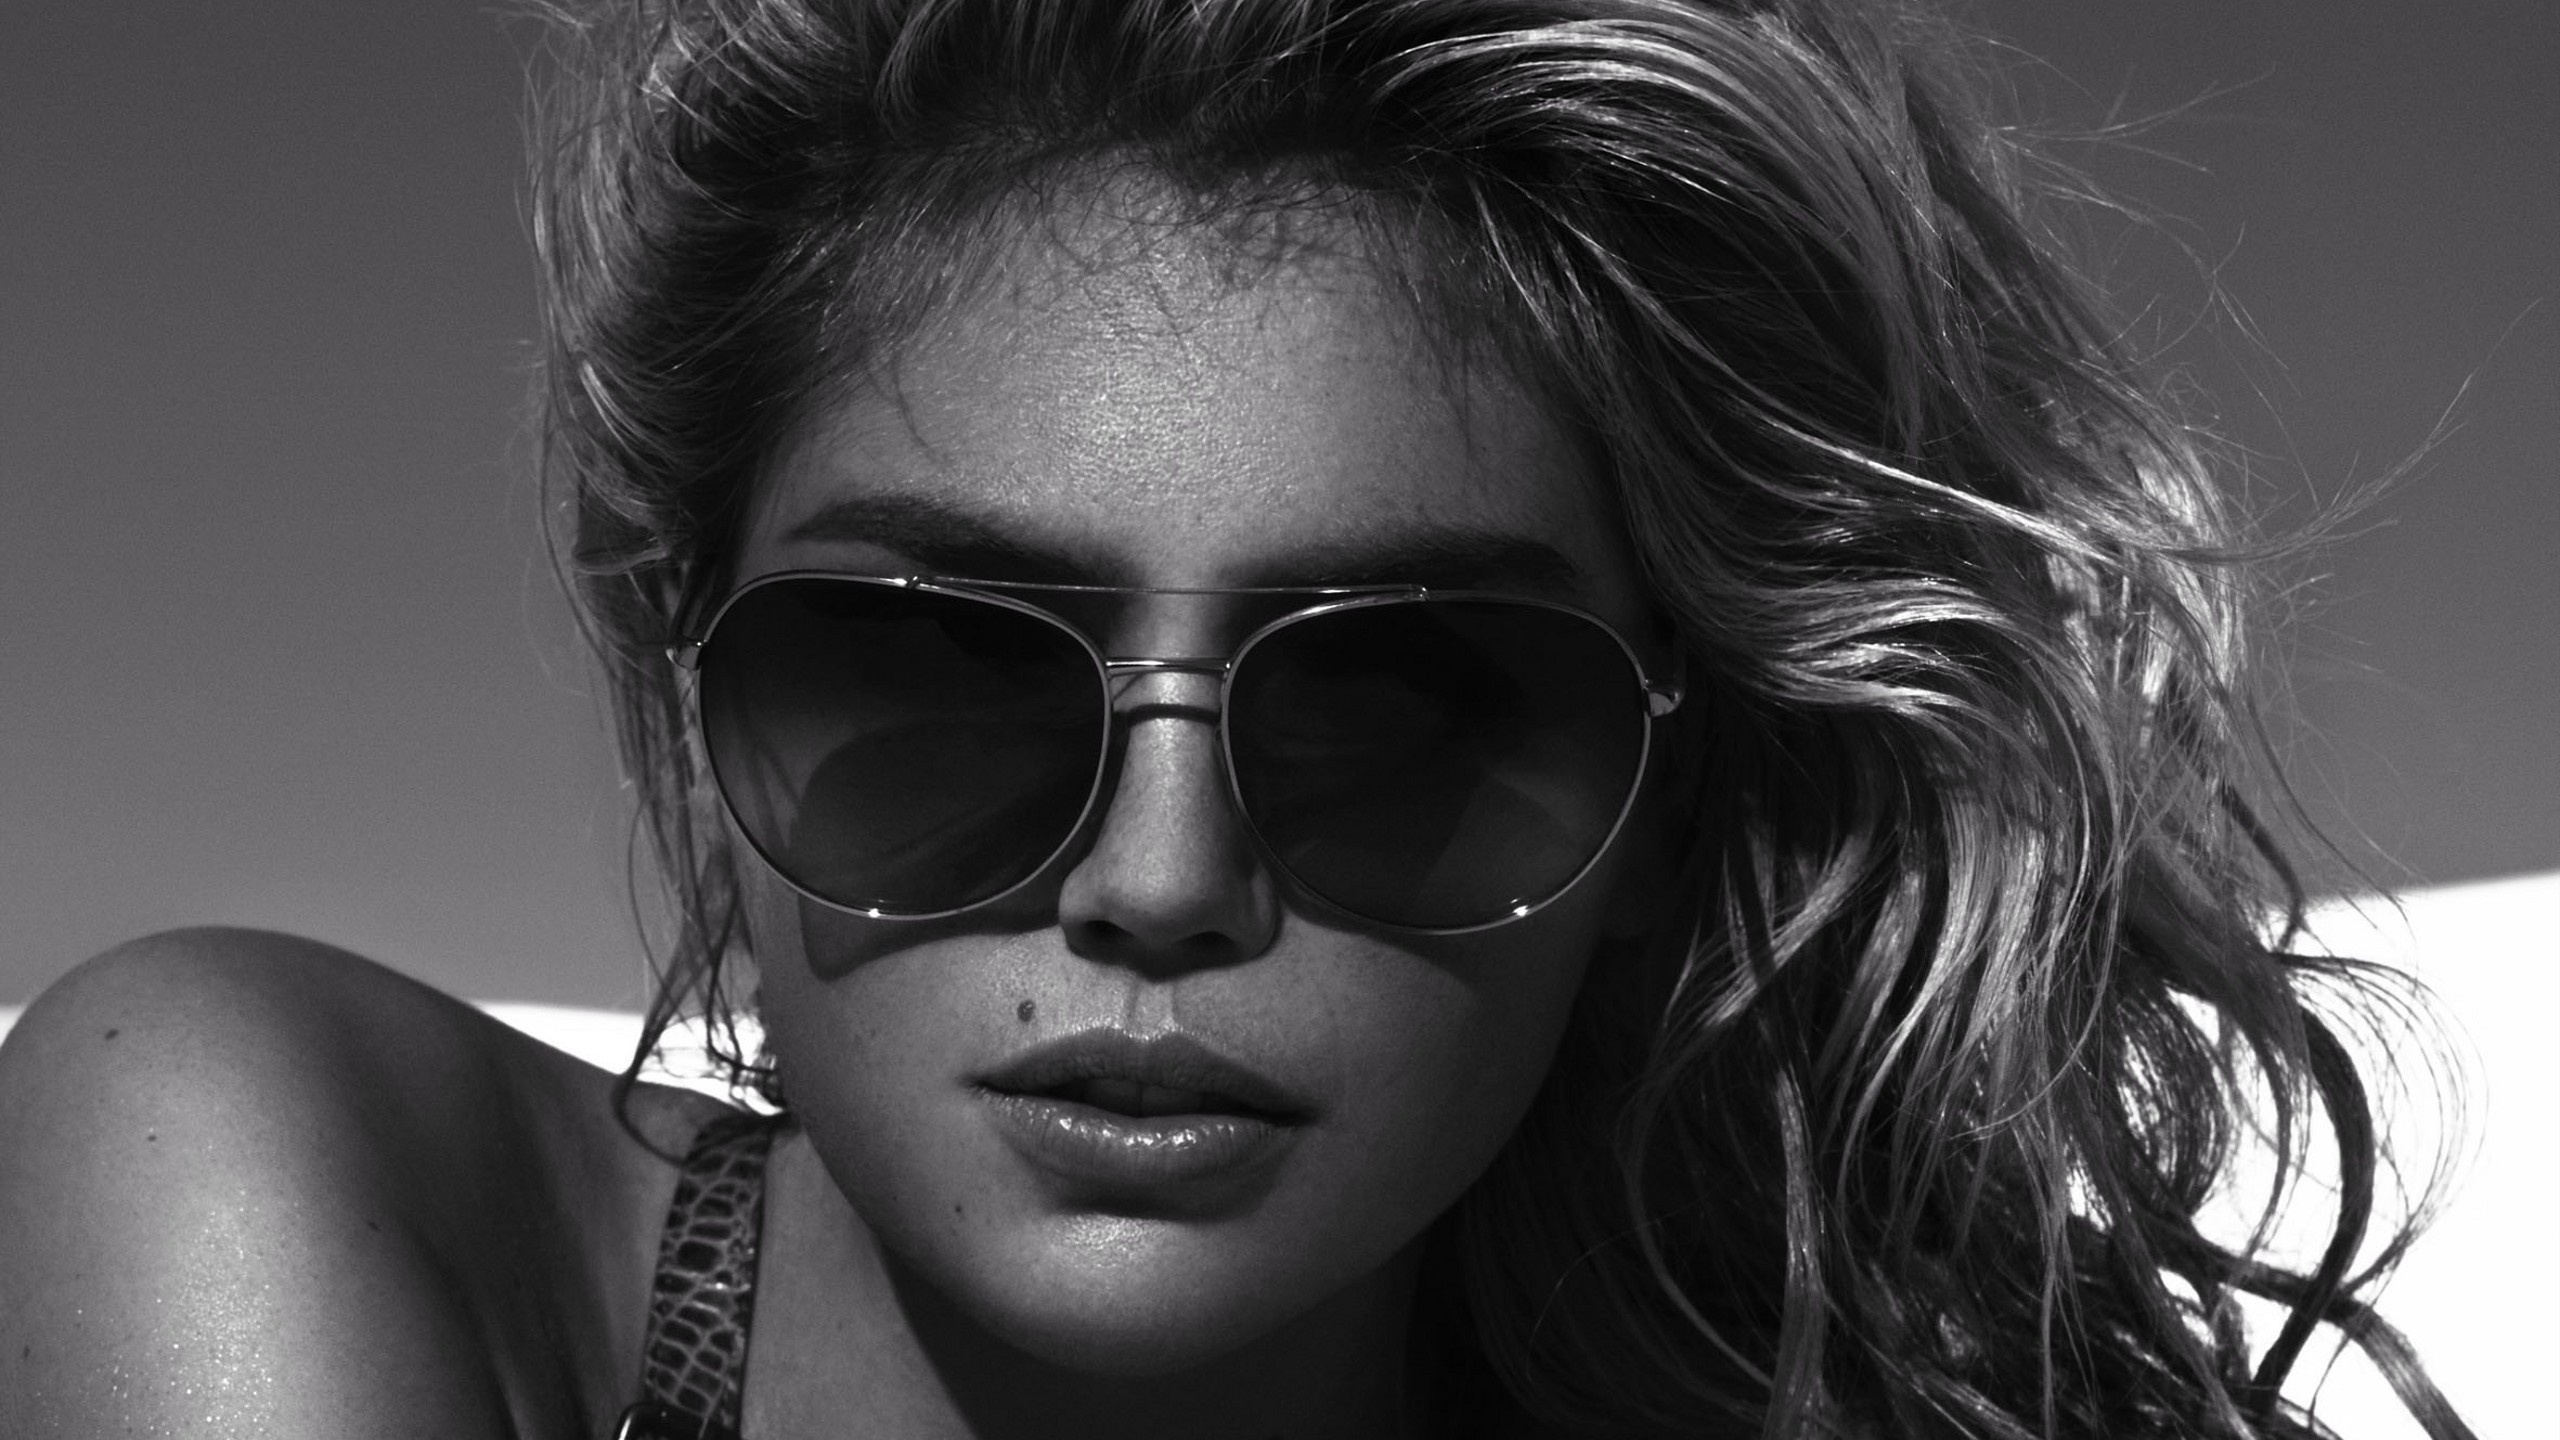 Kate Upton Black and White for 2560x1440 HDTV resolution